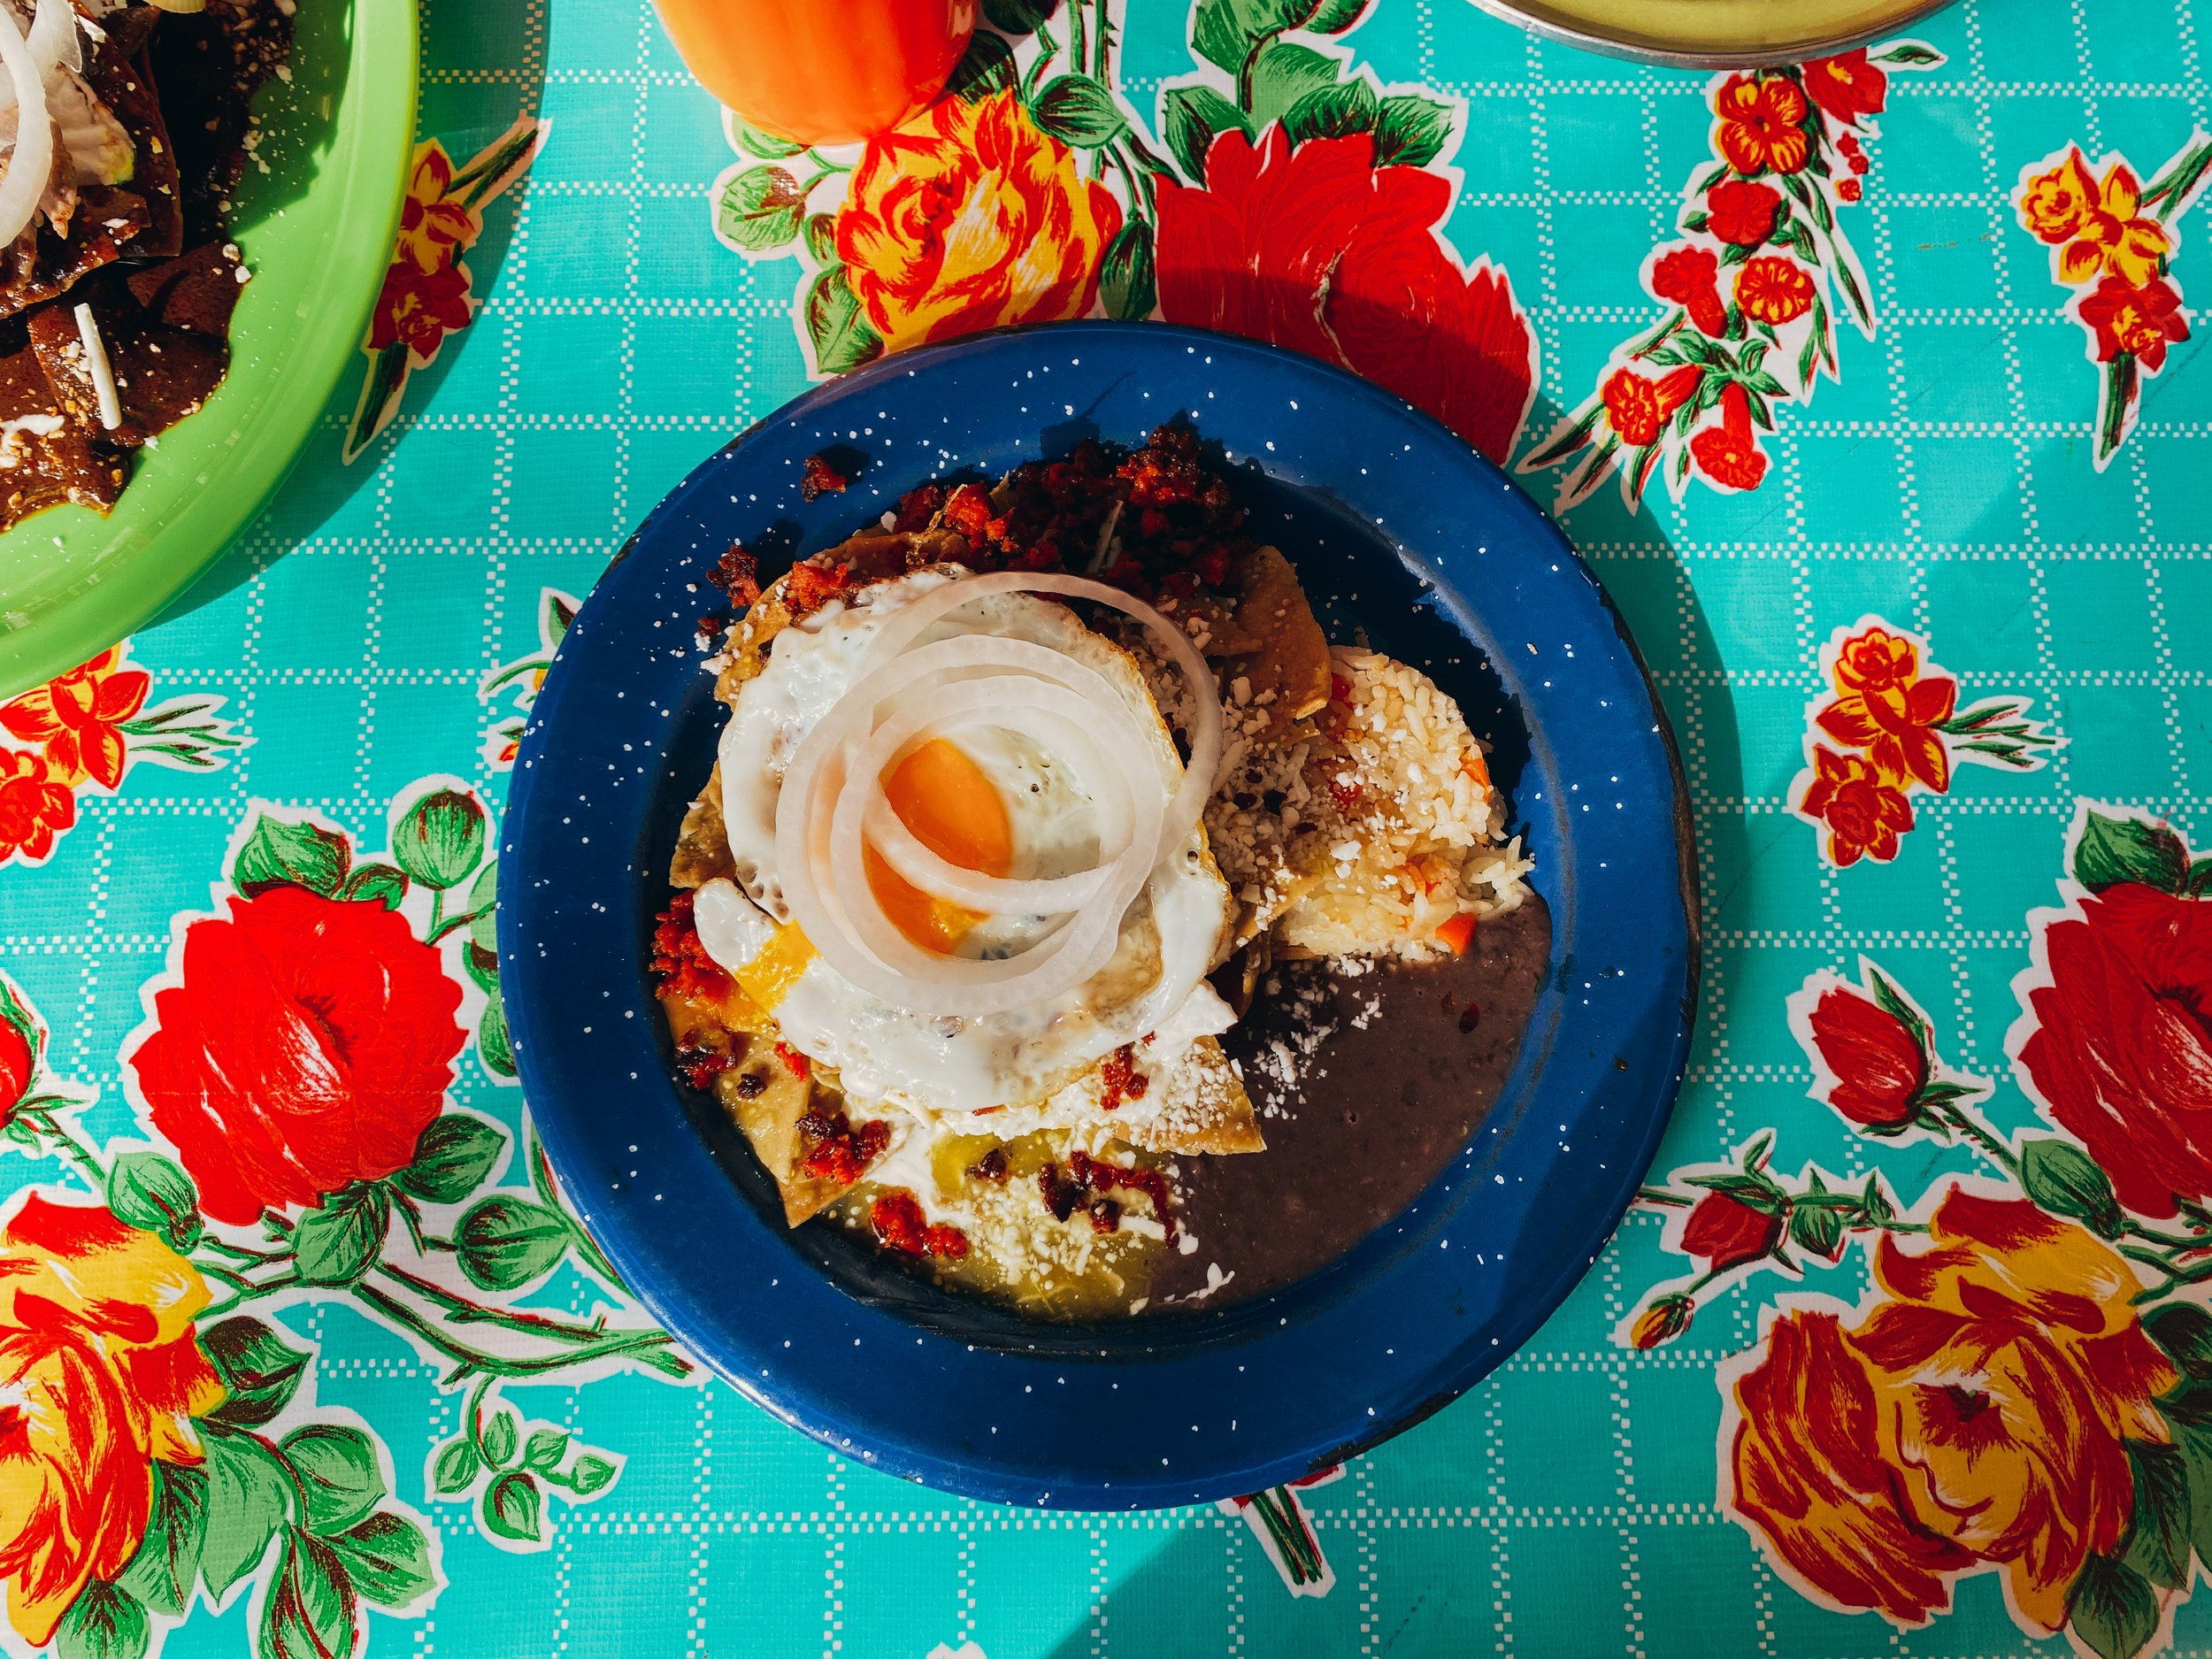 chilaquiles mexico city breakfast